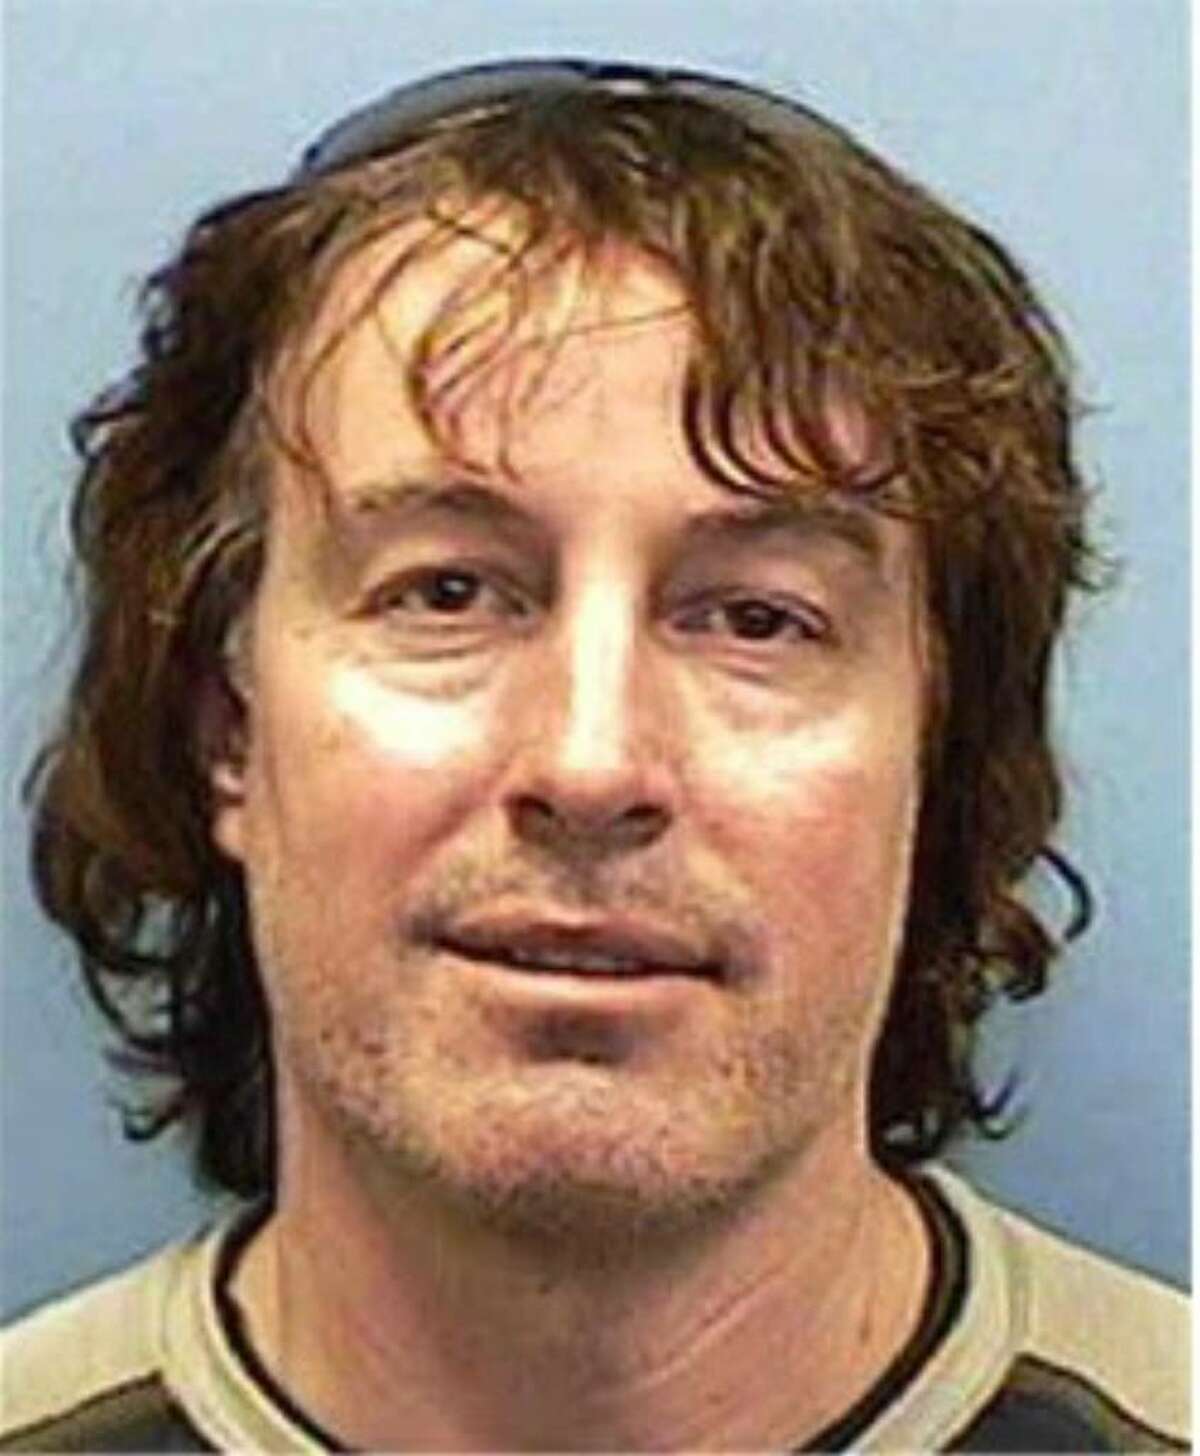 Westport police are seeking Kevin Larkin, 44, of 28 Stony Brook Road, Westport, as a suspect in a sexual assault that occurred early Wednesday morning.